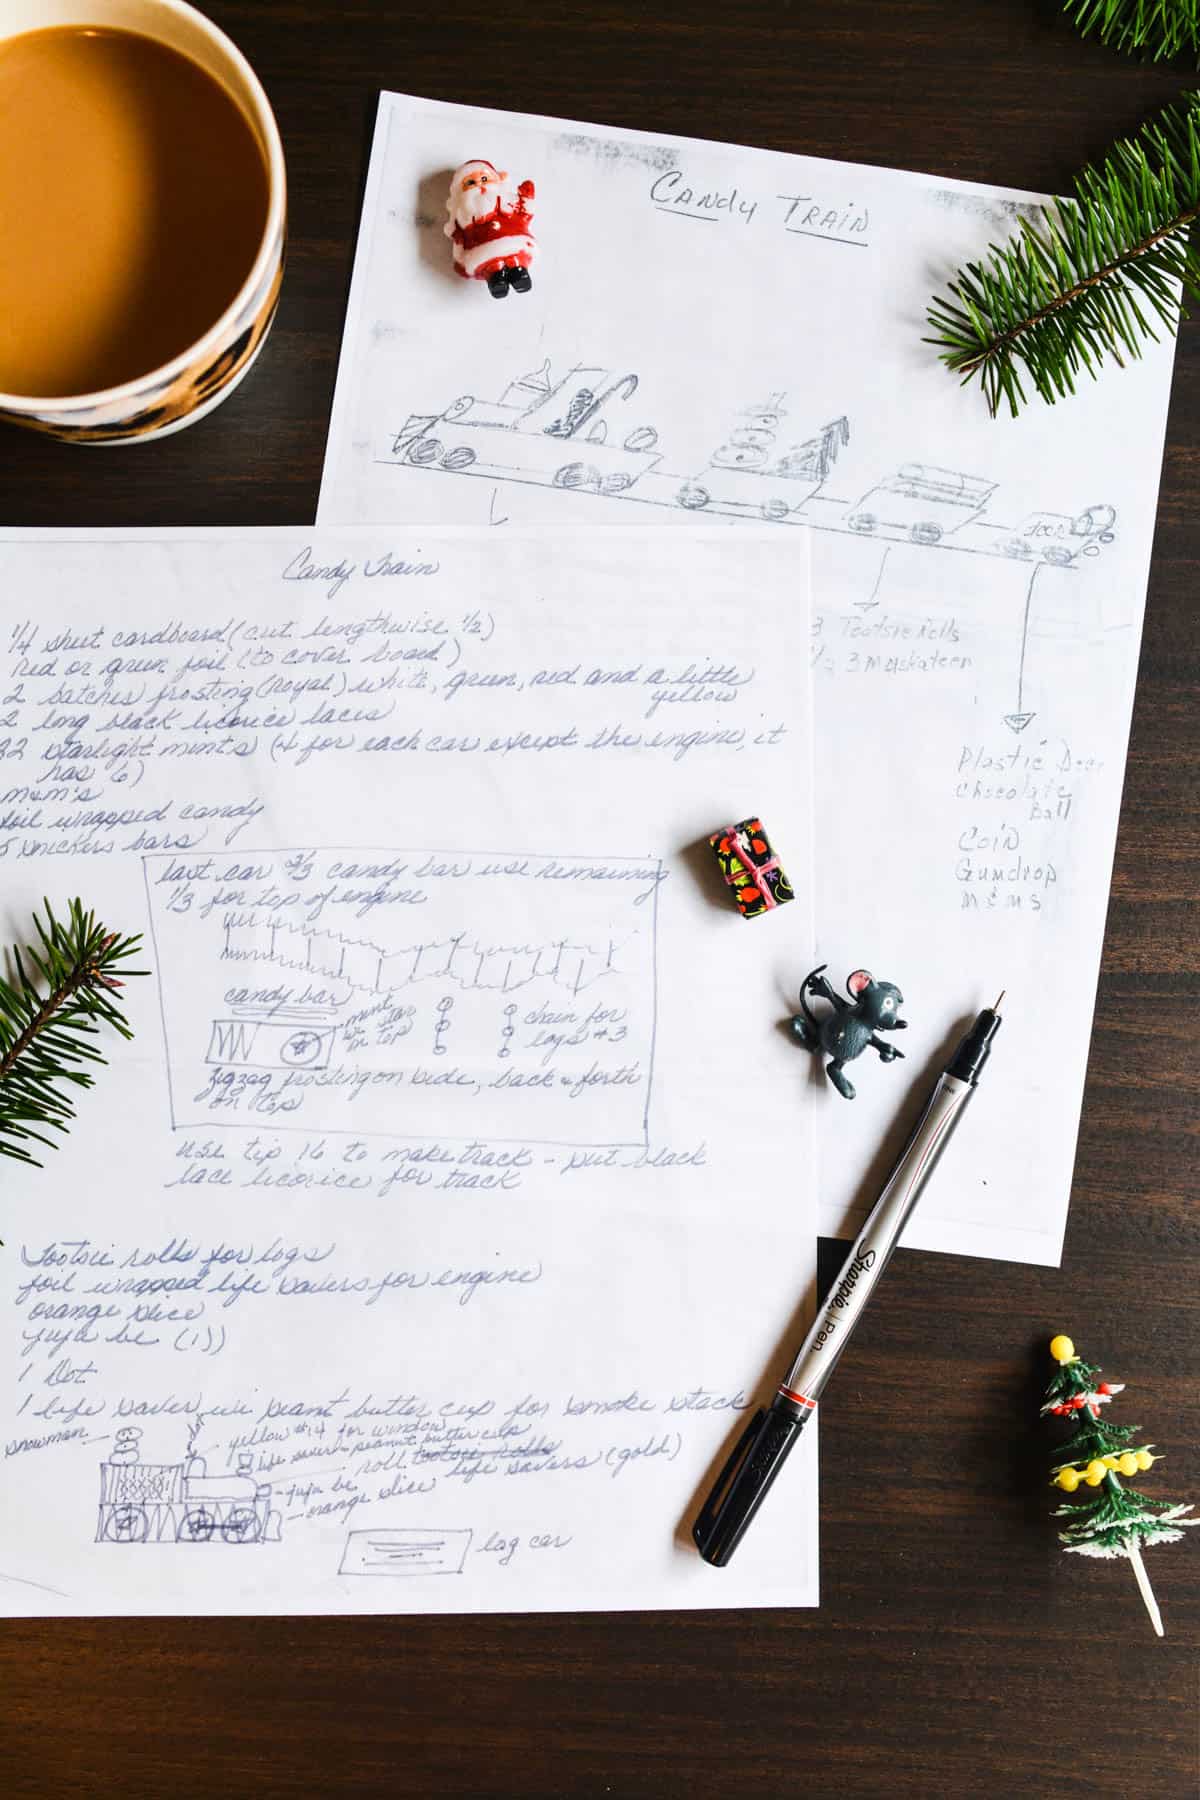 Hand written directions to make a holiday candy bar train.